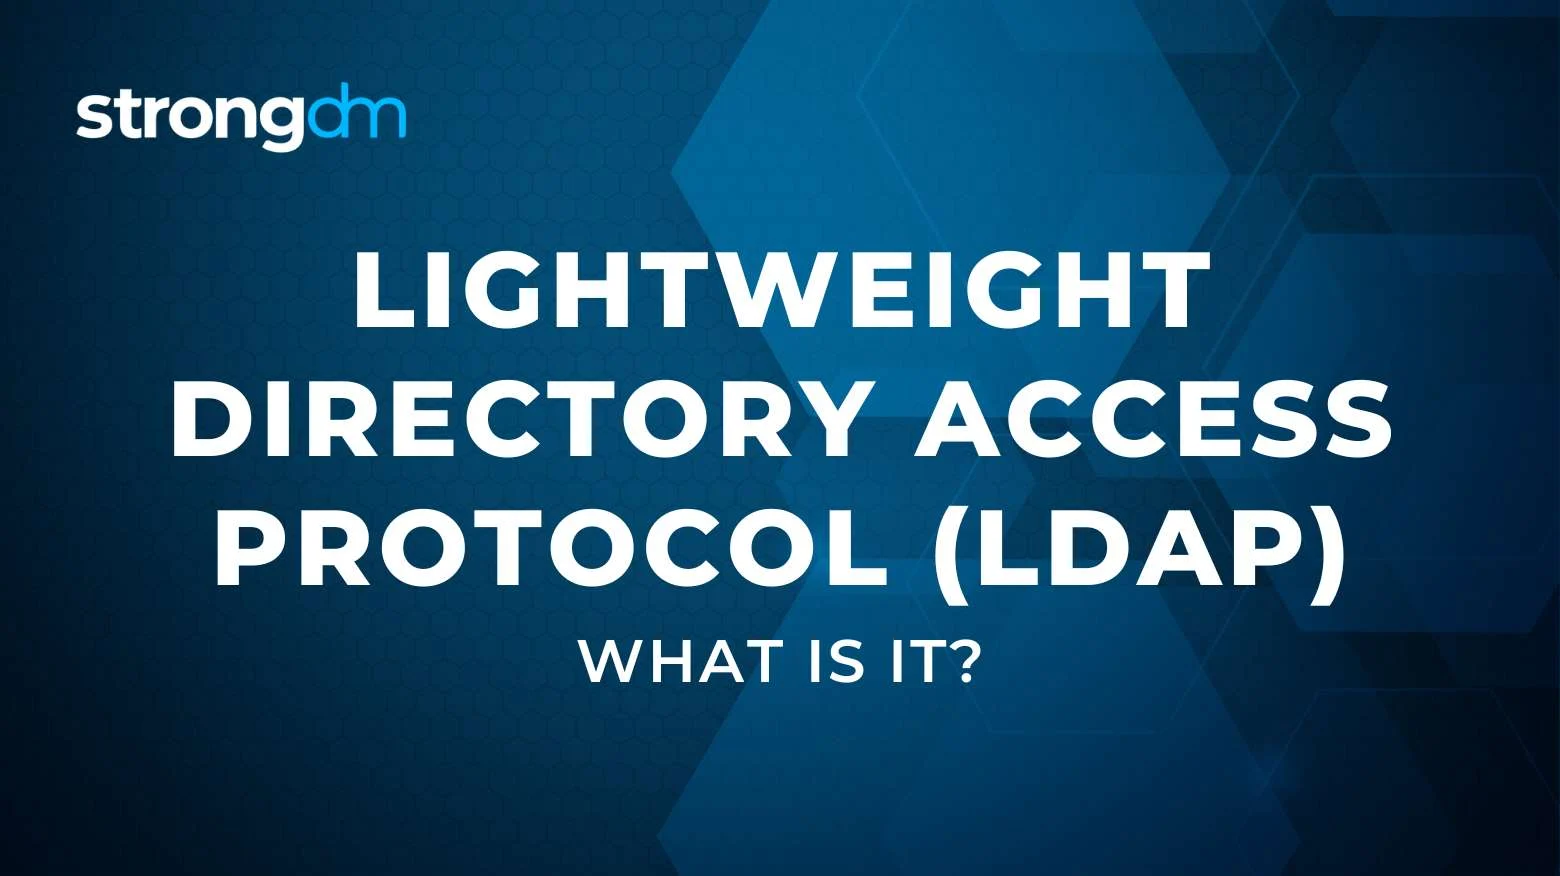 What is Lightweight Directory Access Protocol (LDAP)?